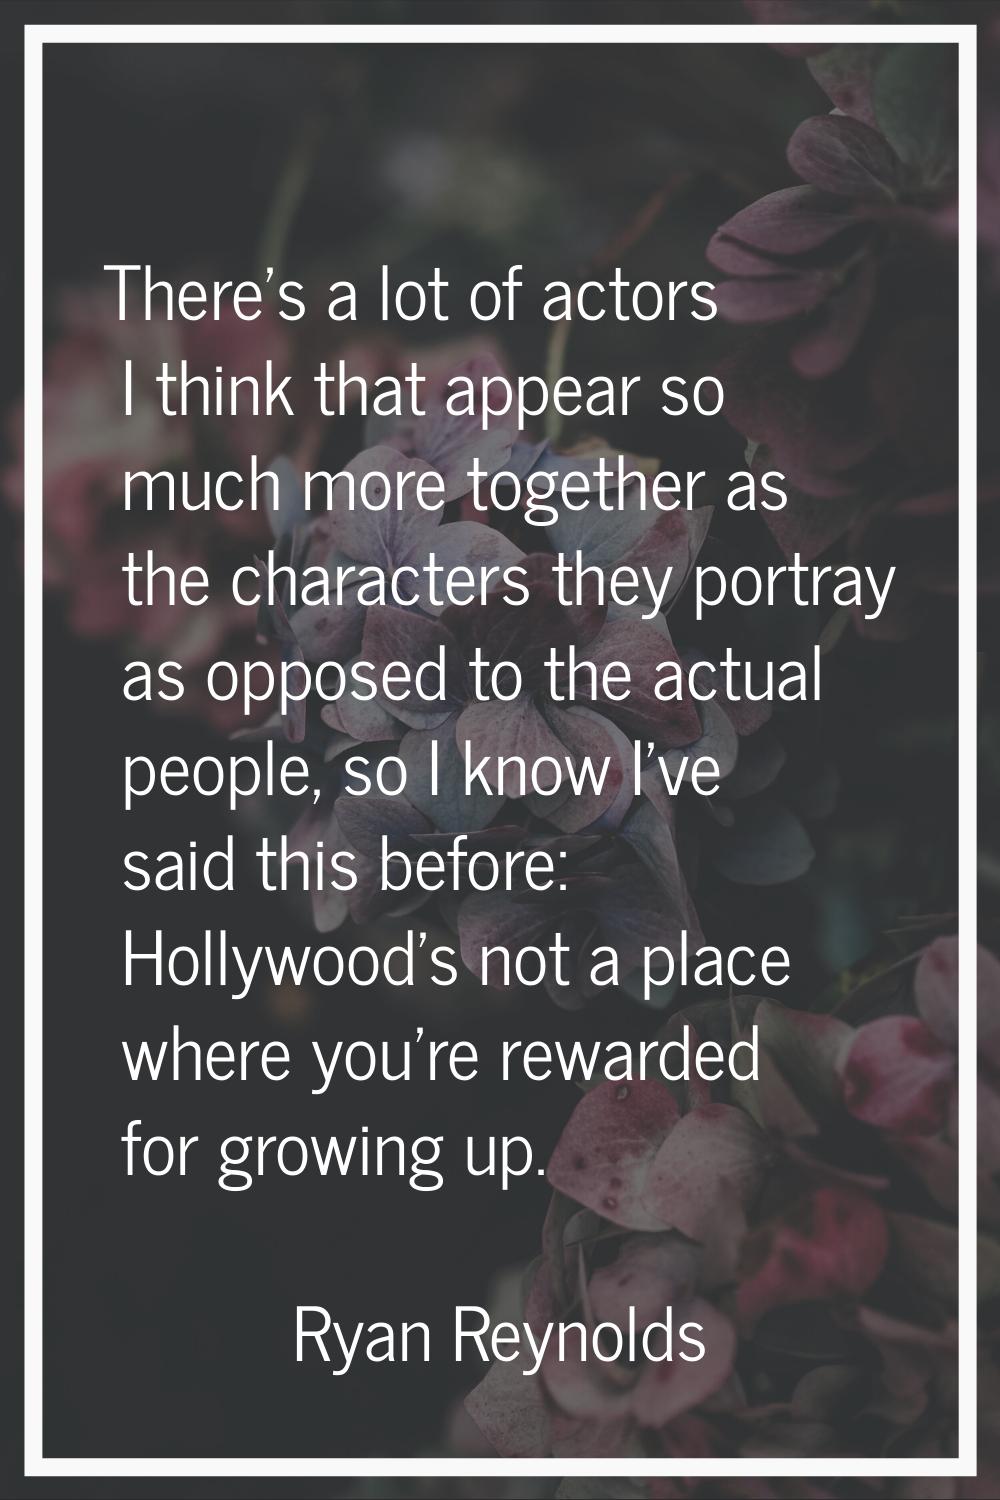 There's a lot of actors I think that appear so much more together as the characters they portray as